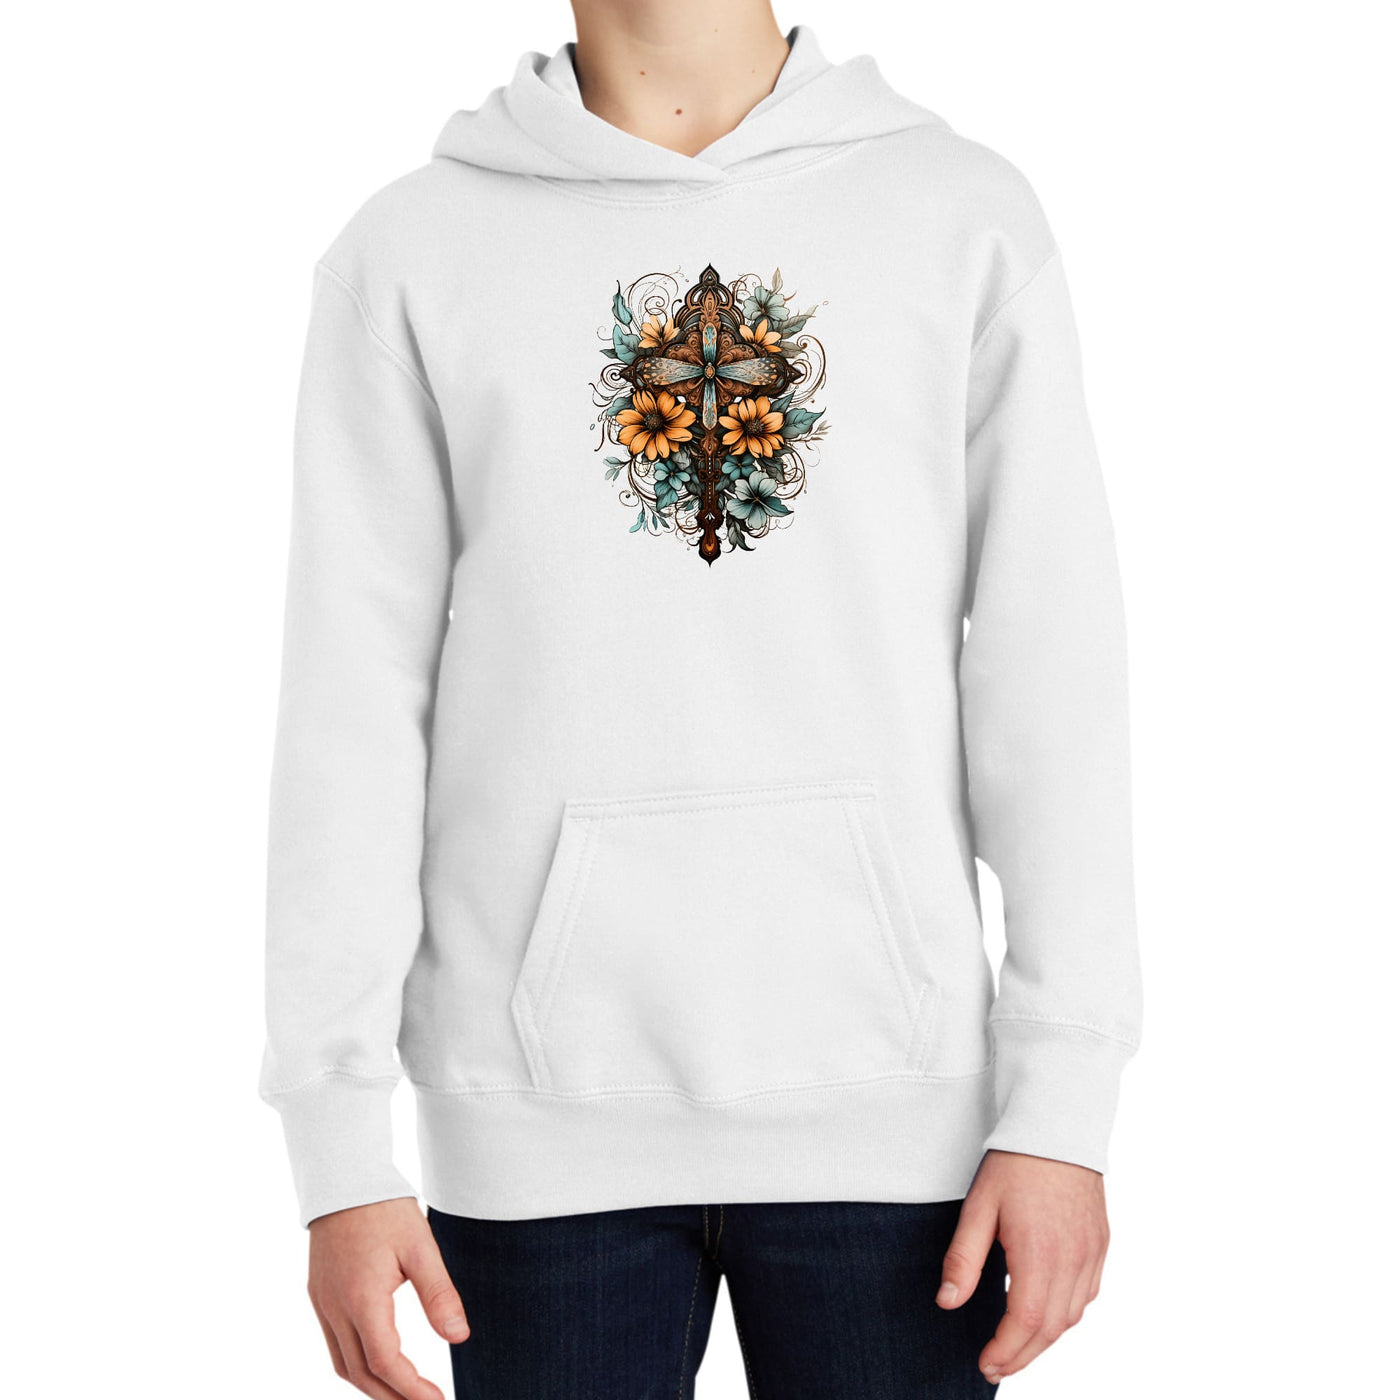 Youth Long Sleeve Hoodie Christian Cross Floral Bouquet Brown And Blue - Youth